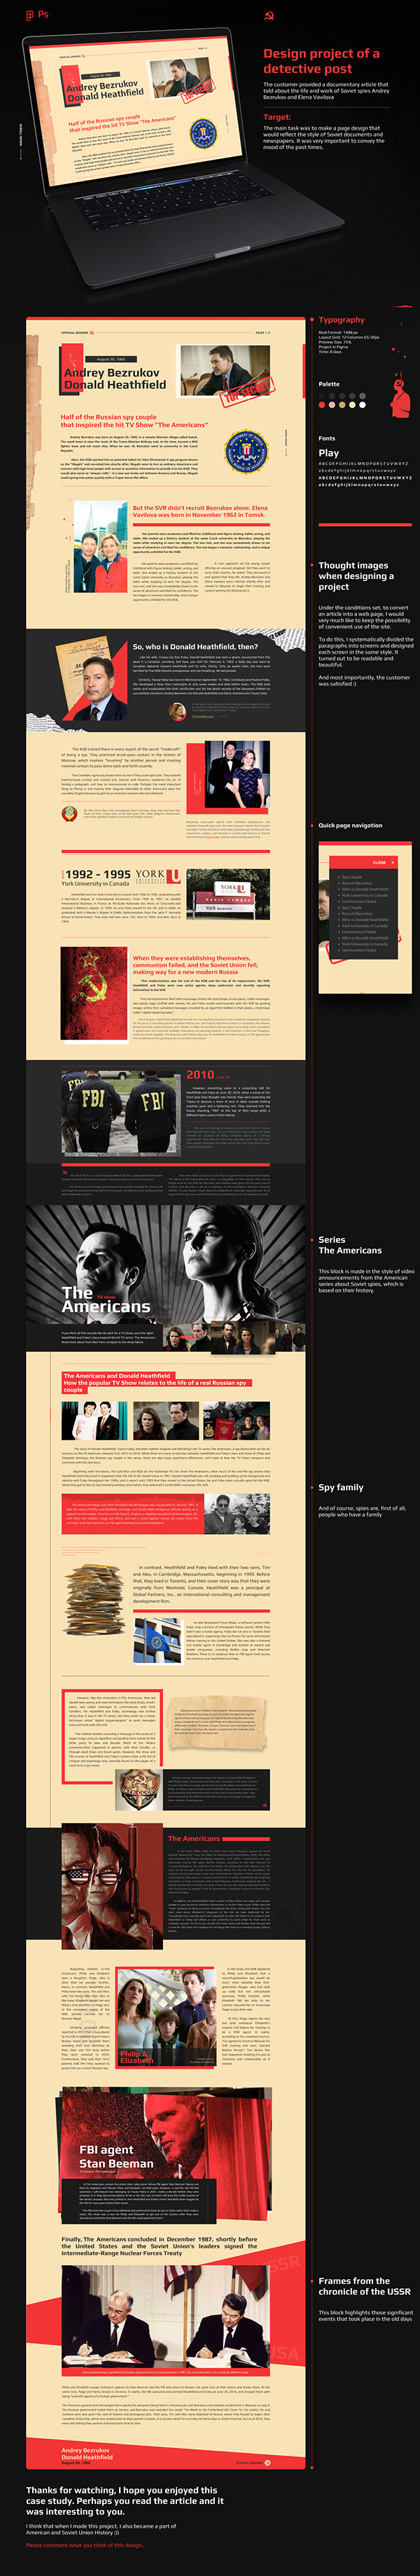 Landing page design: Spies of the USSR